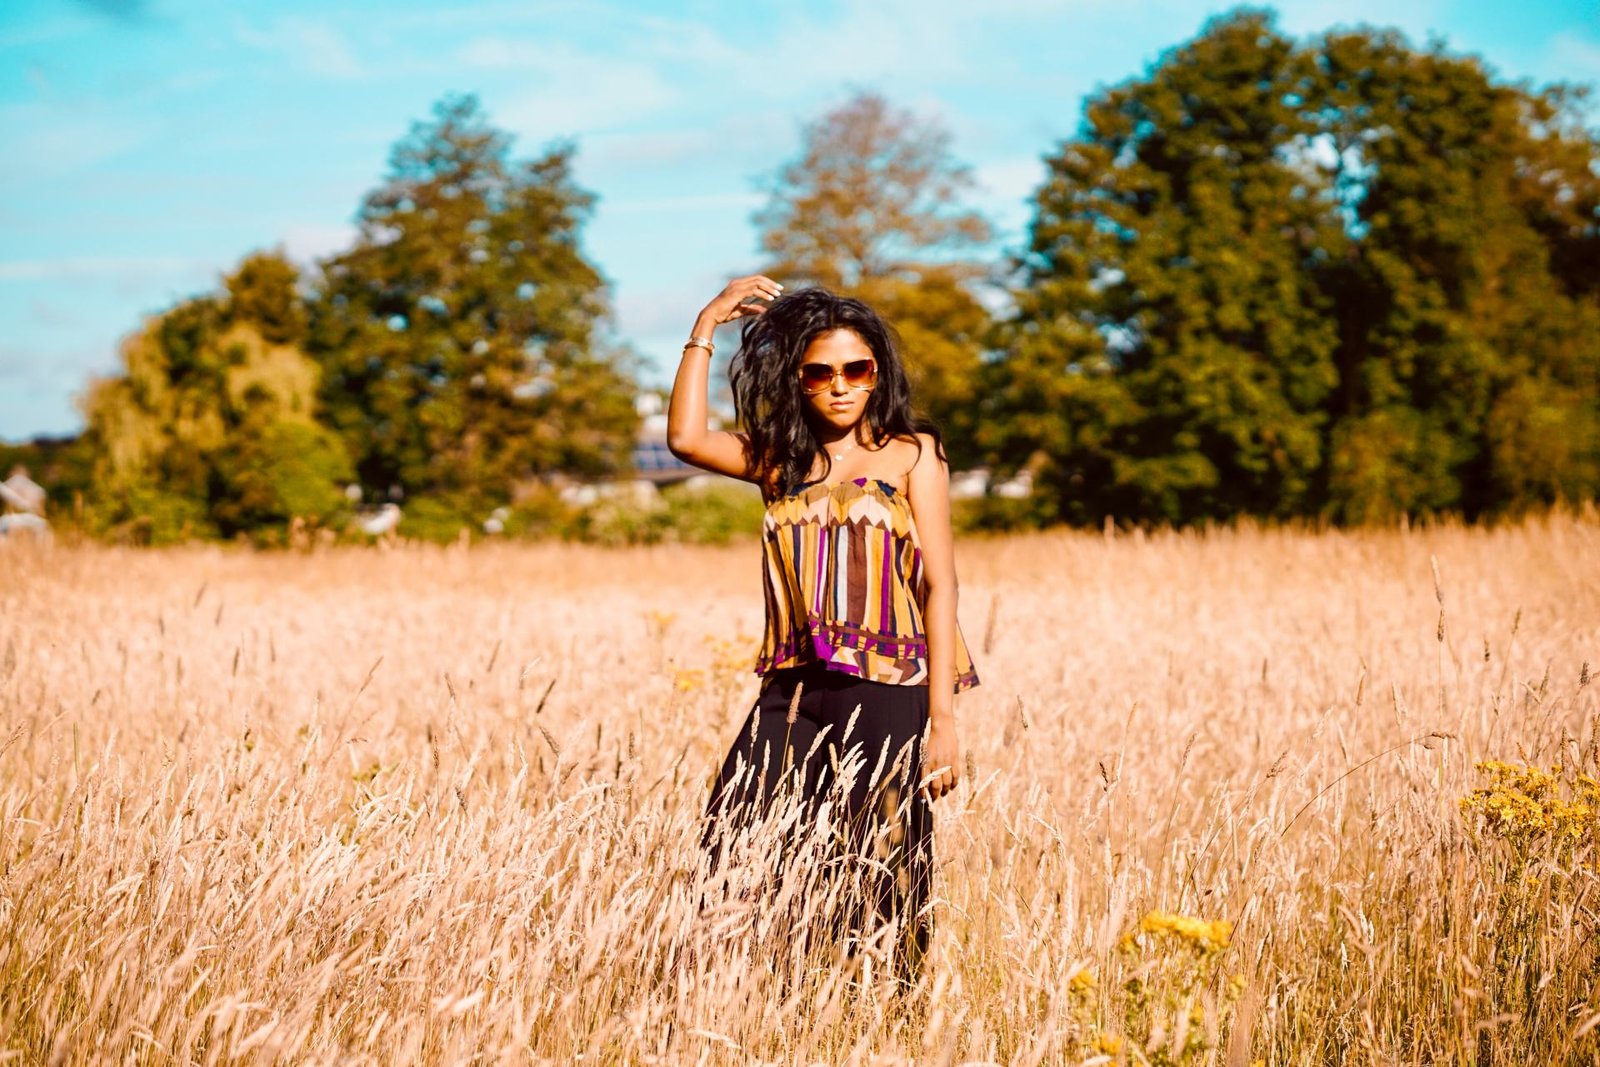 Sachini wearing a Bash dress standing in a field of wheat